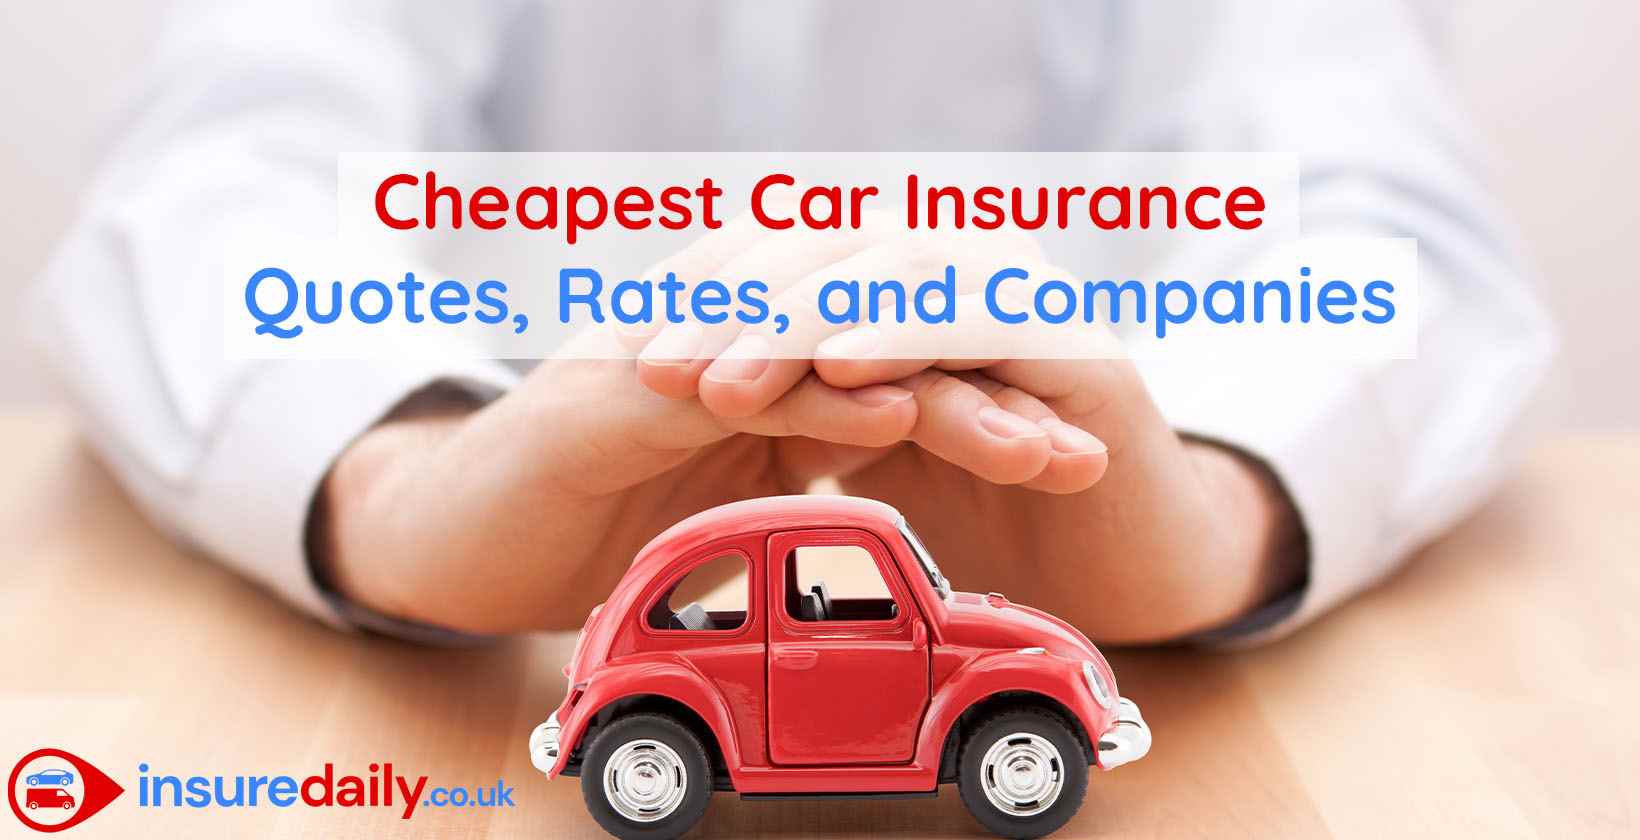 Car Insurance Online Quote